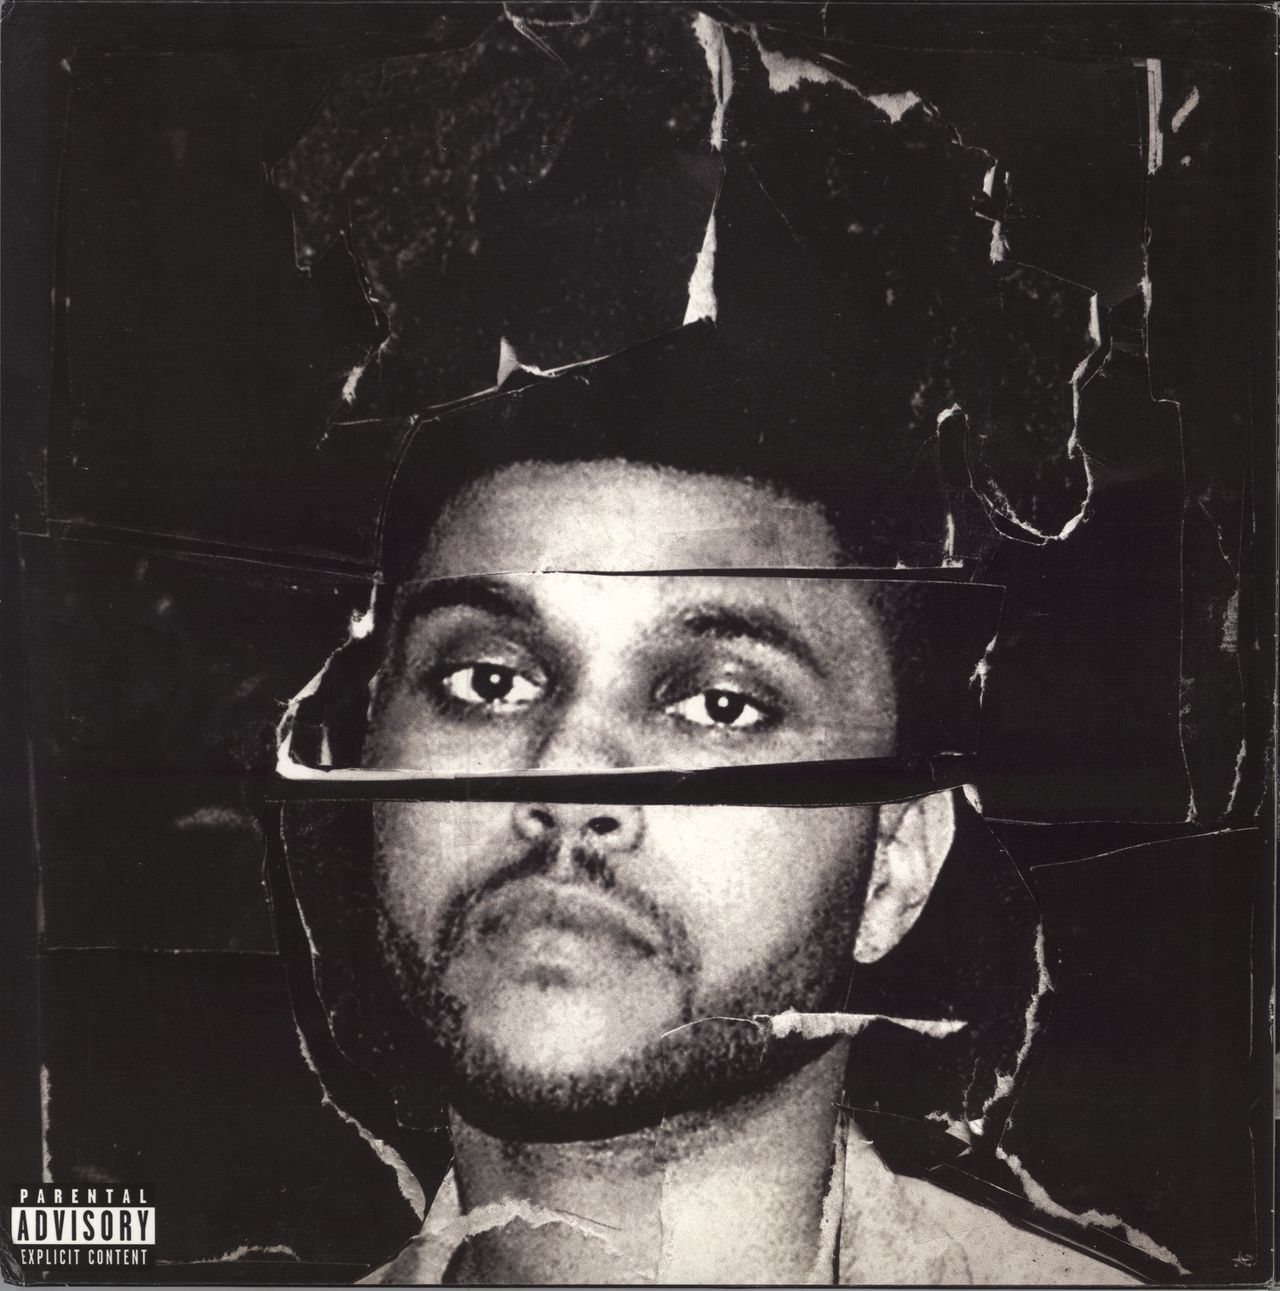 The Weeknd Beauty Behind The Madness UK 2-LP vinyl record set (Double LP Album) 0602547503367